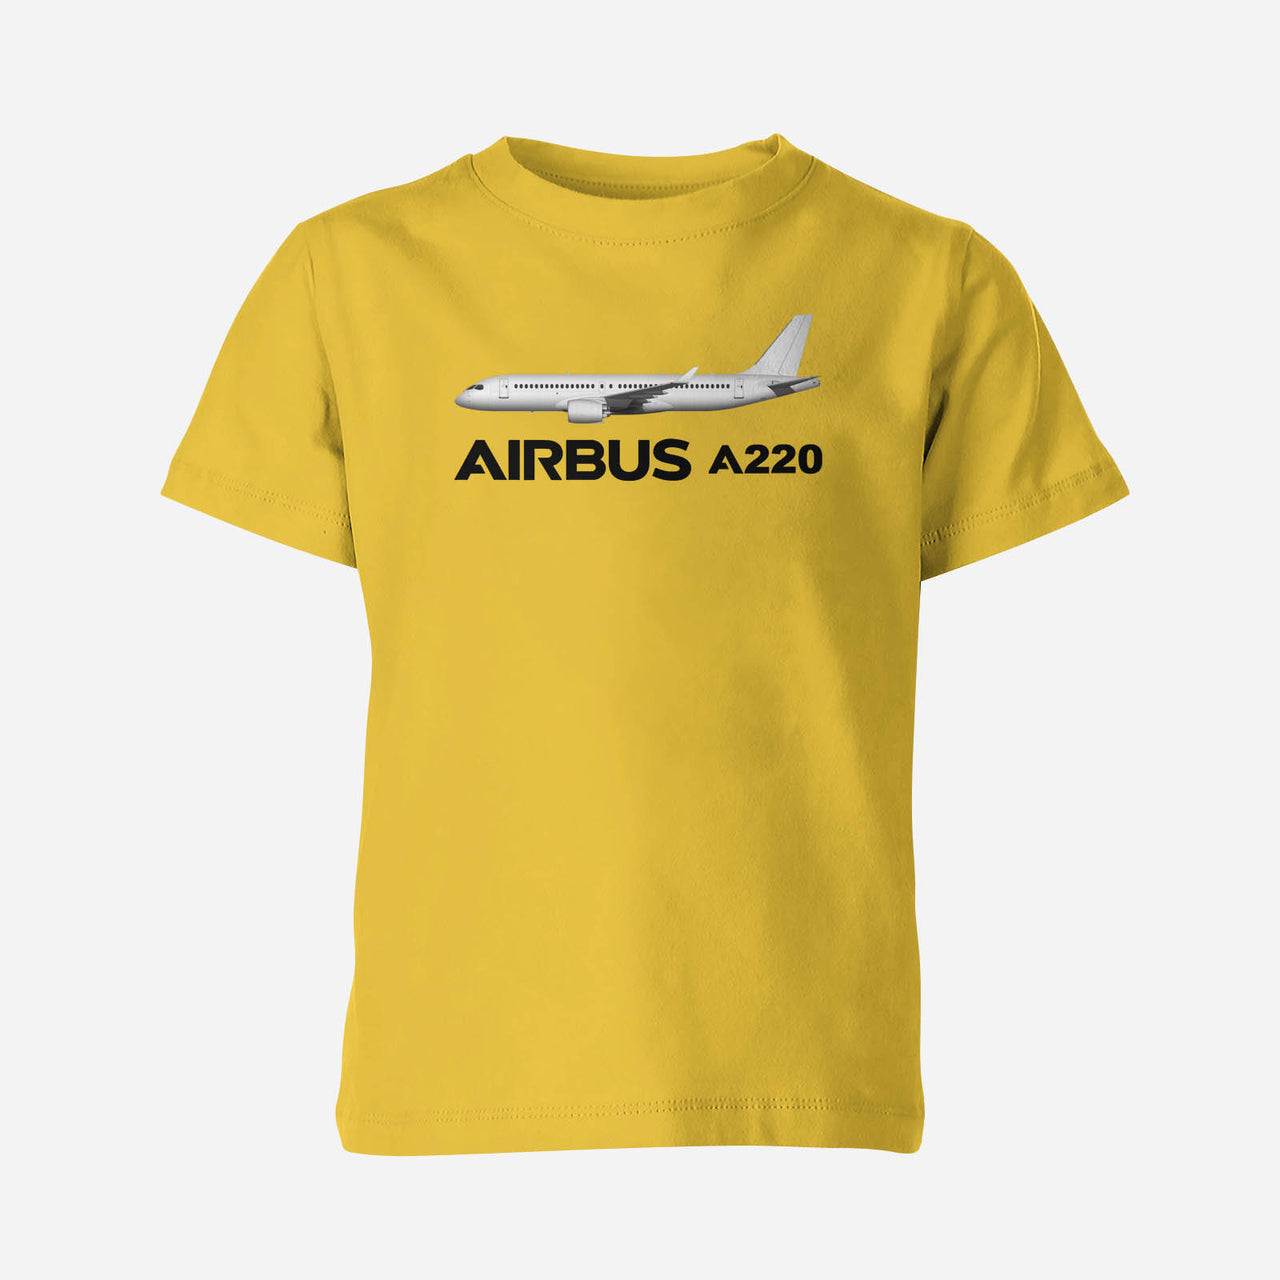 The Airbus A220 Designed Children T-Shirts